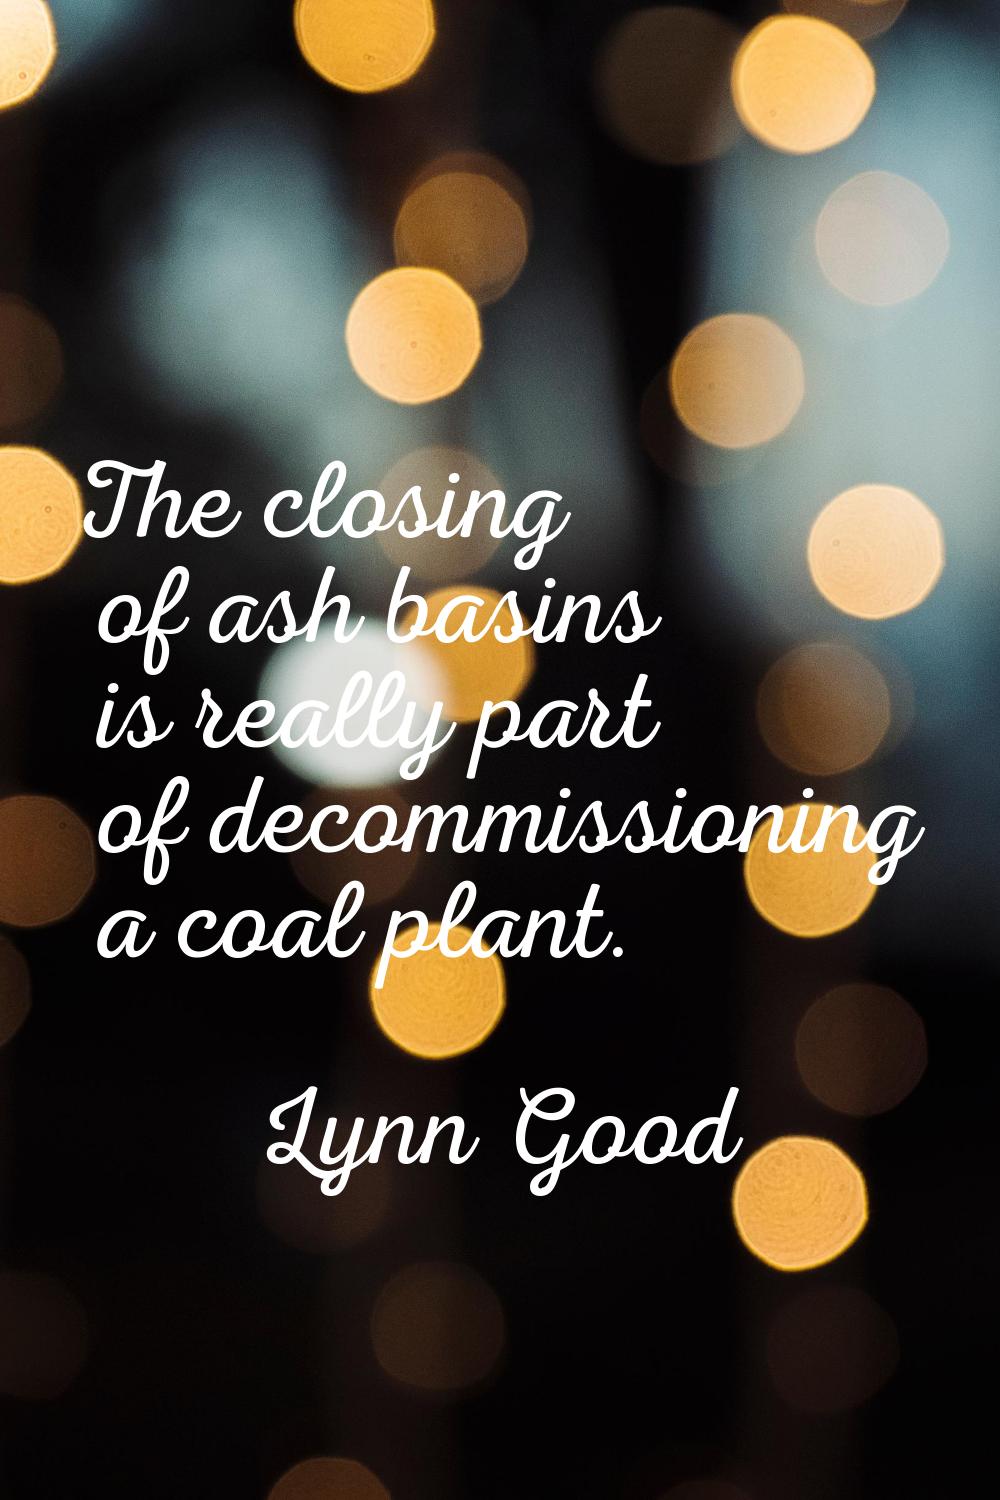 The closing of ash basins is really part of decommissioning a coal plant.